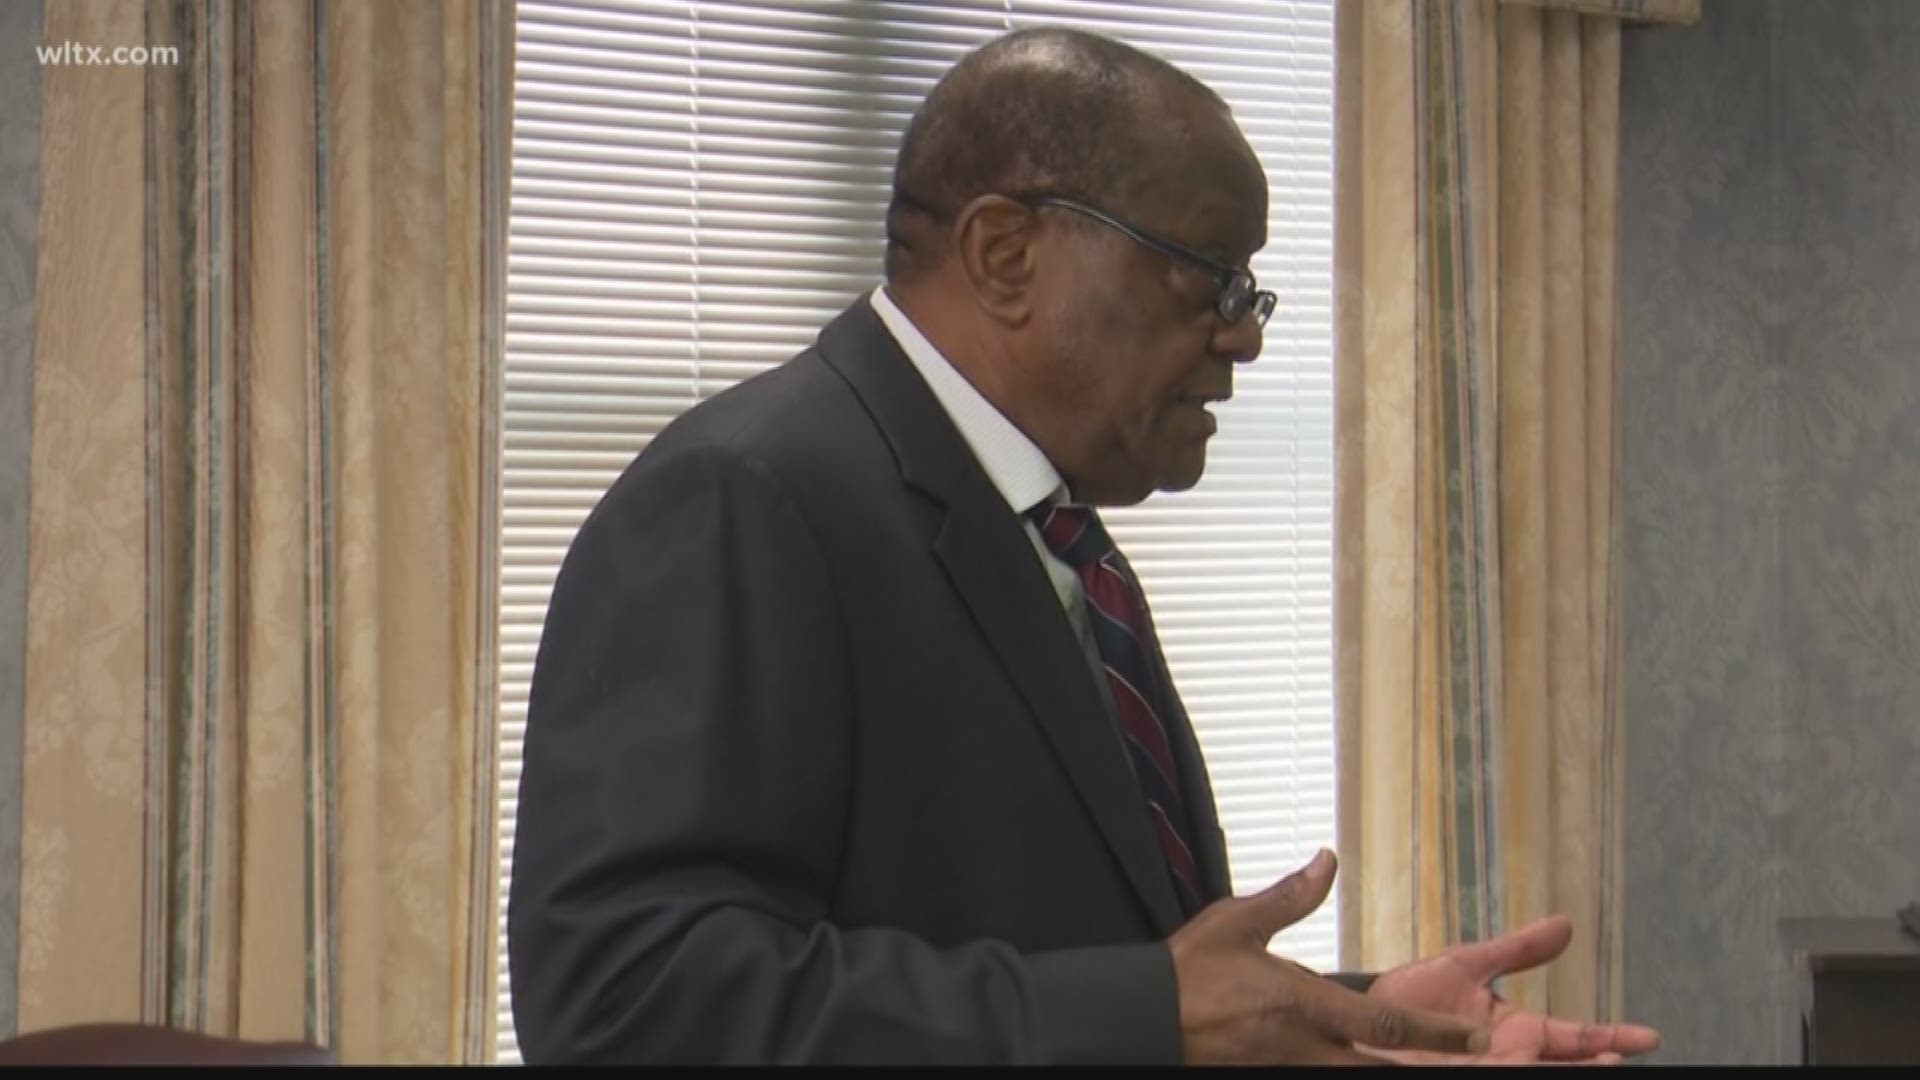 On social media, many of you asked if retiring Executive Director Gilbert Walker would receive state benefits.